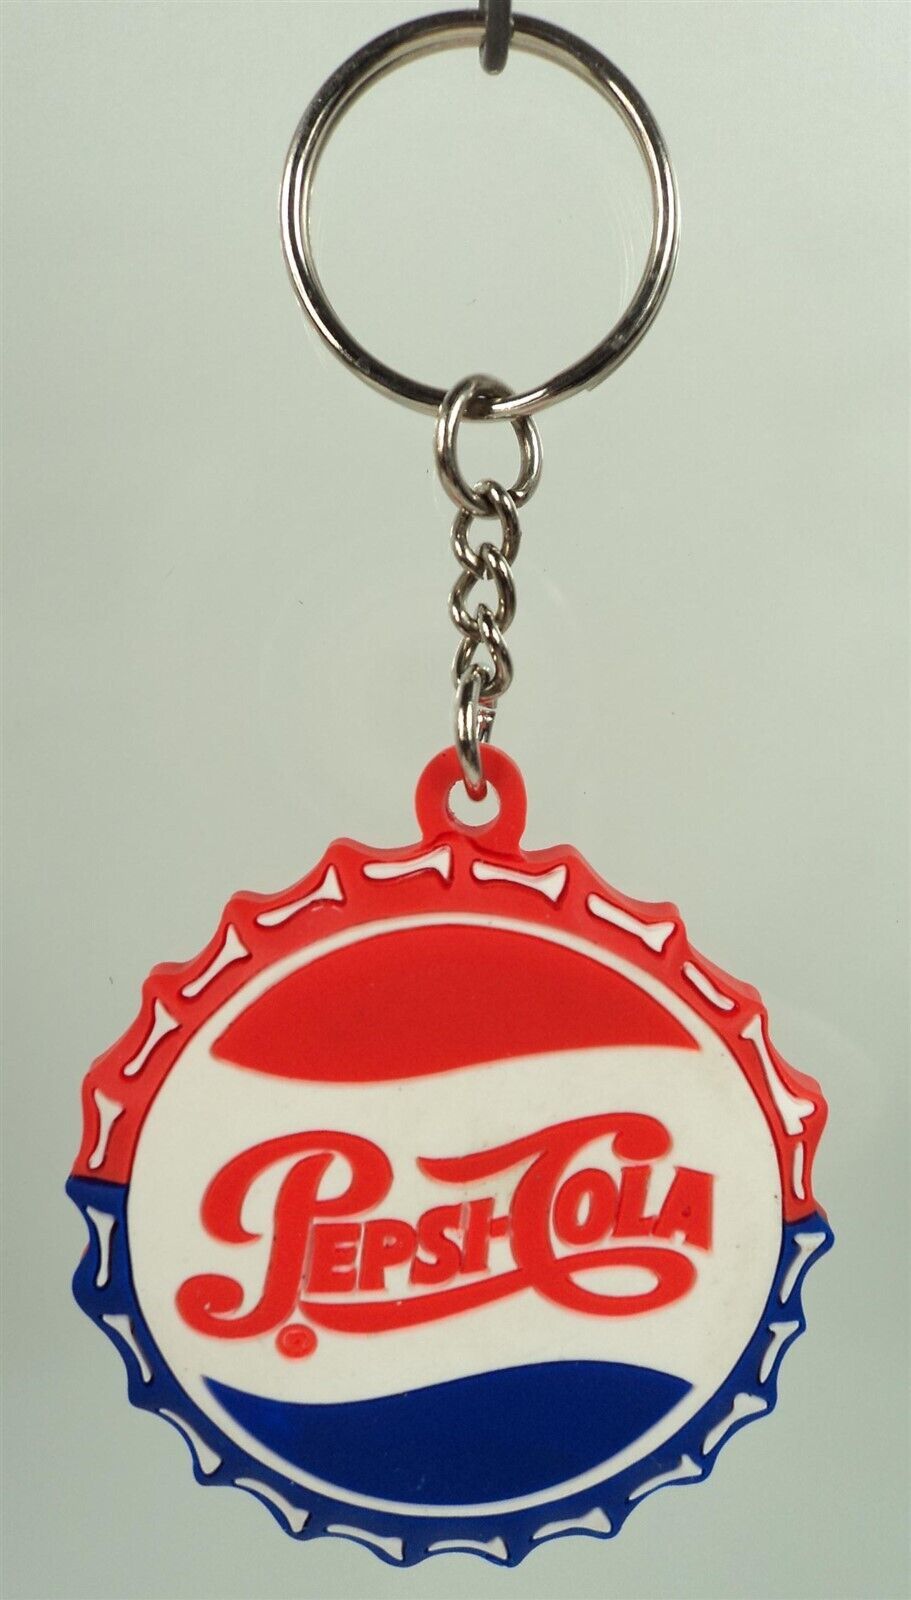 Primary image for Pepsi-Cola Bottle Cap Keychain Key Ring 